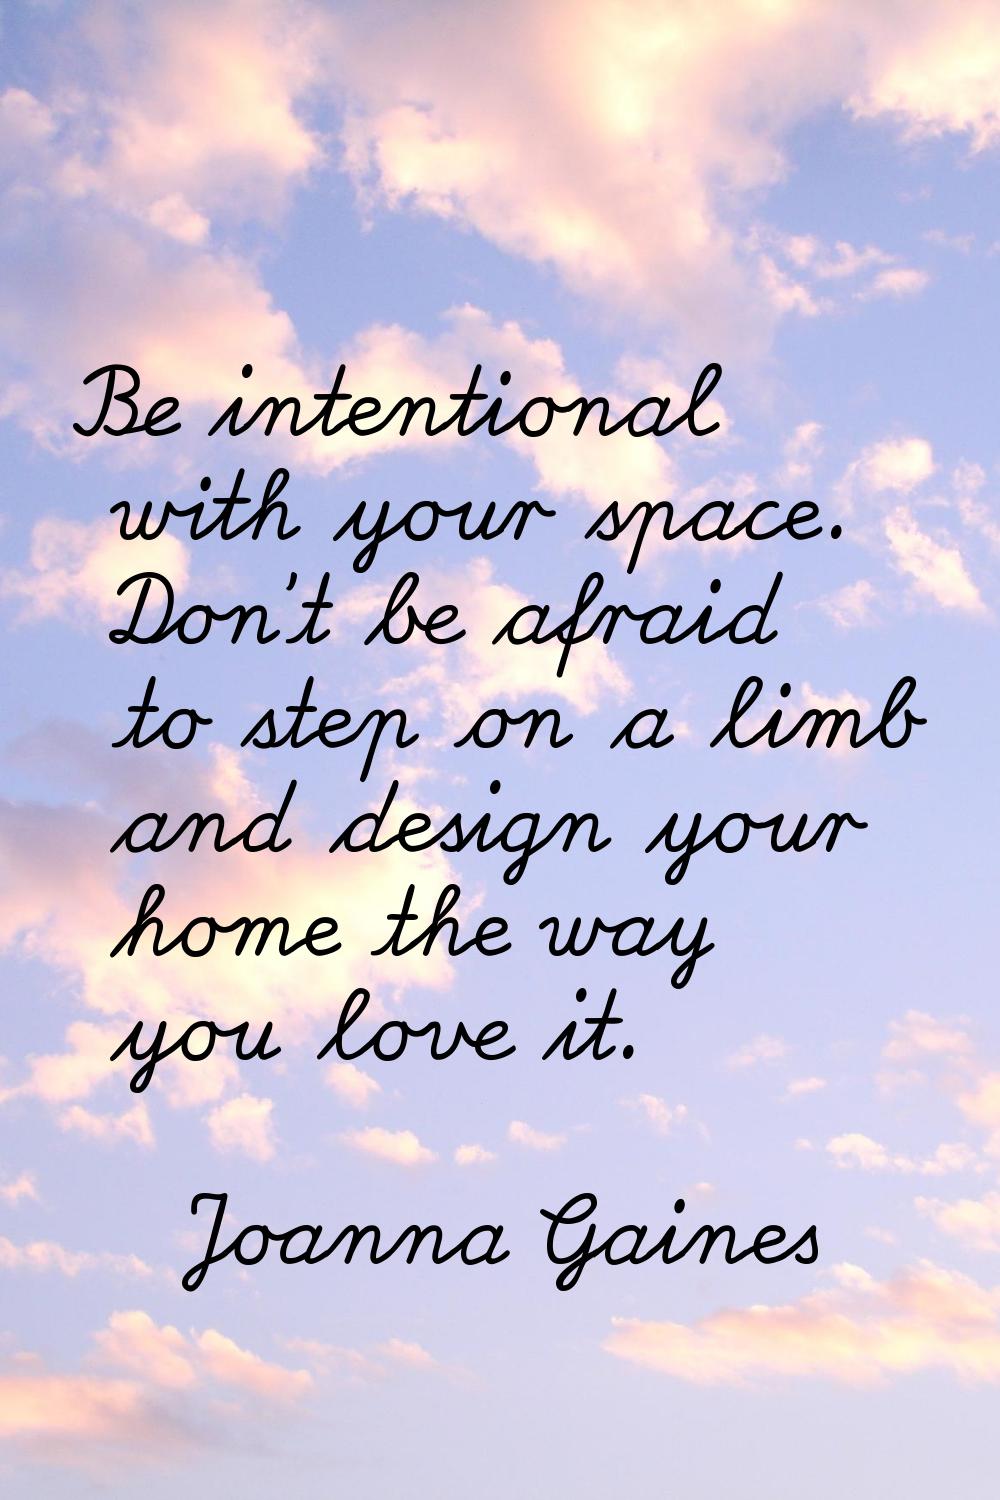 Be intentional with your space. Don't be afraid to step on a limb and design your home the way you 